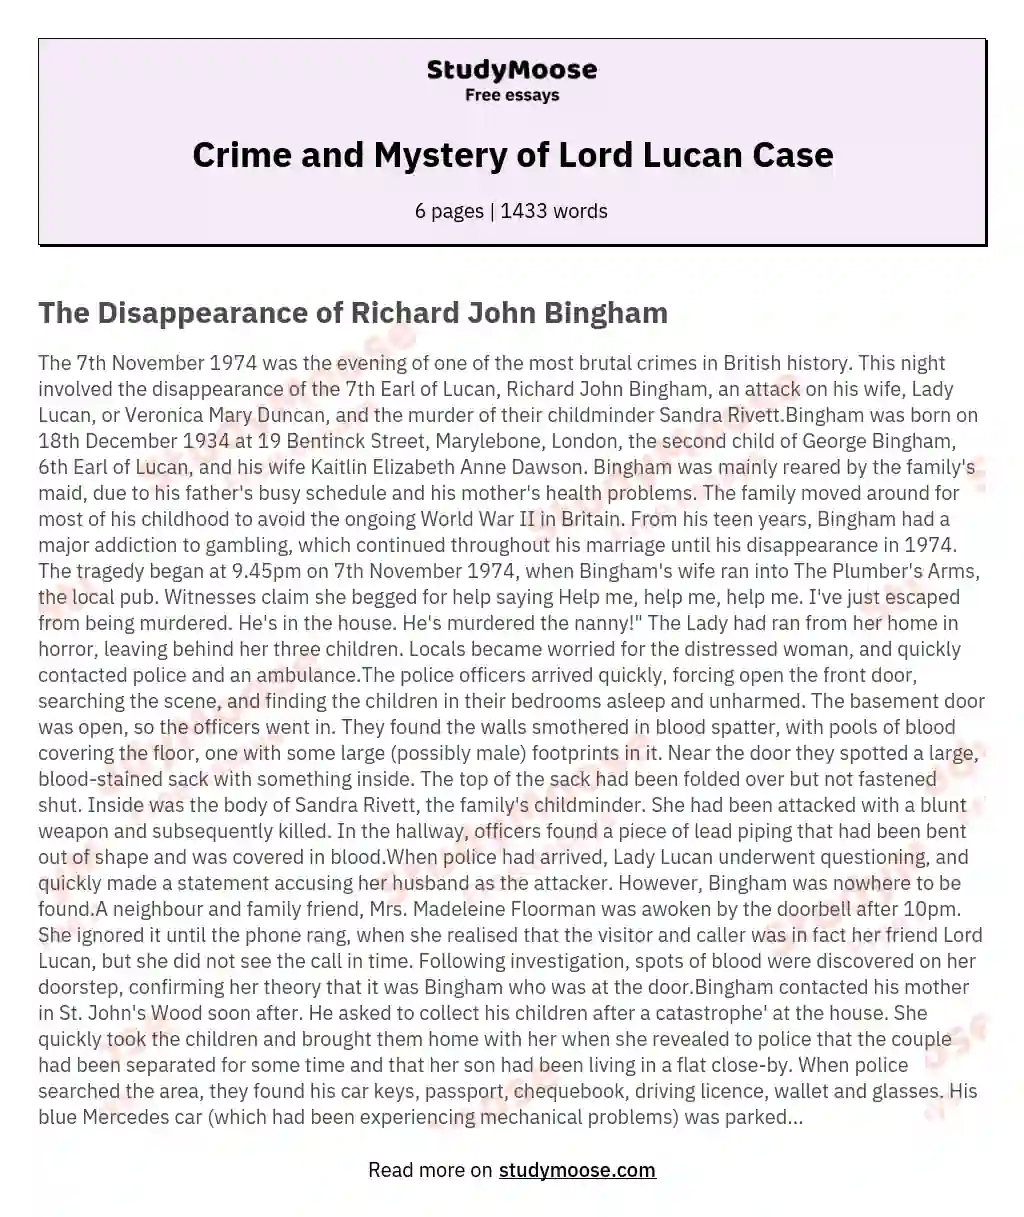 Crime and Mystery of Lord Lucan Case essay